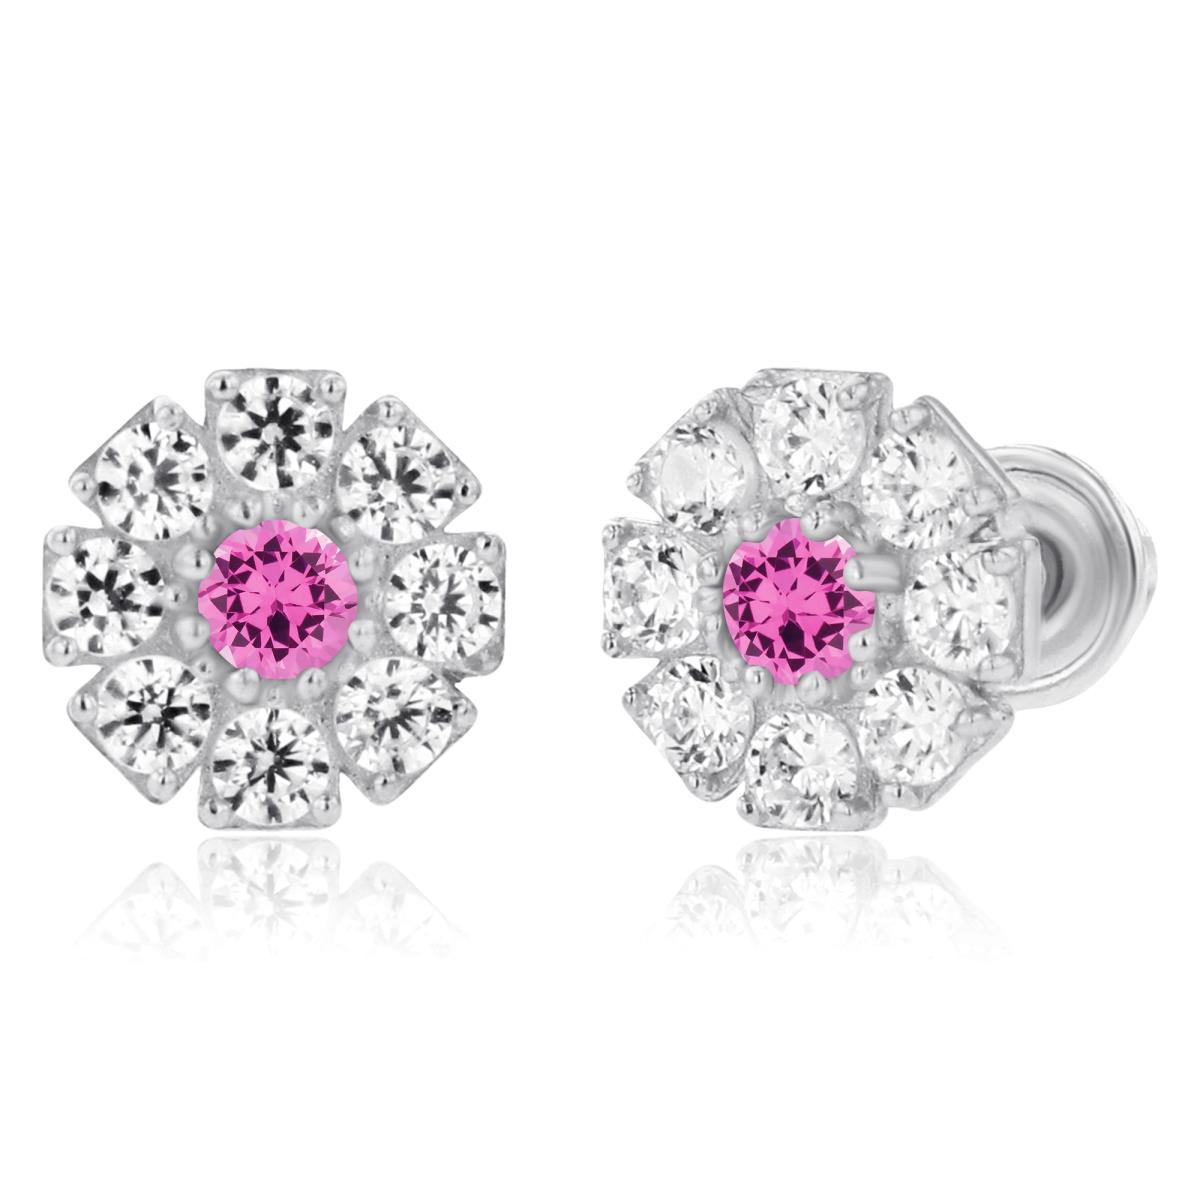 14K White Gold 2mm Round Created Pink Sapphire & 1.5mm Created White Sapphire Flower Screwback Earrings